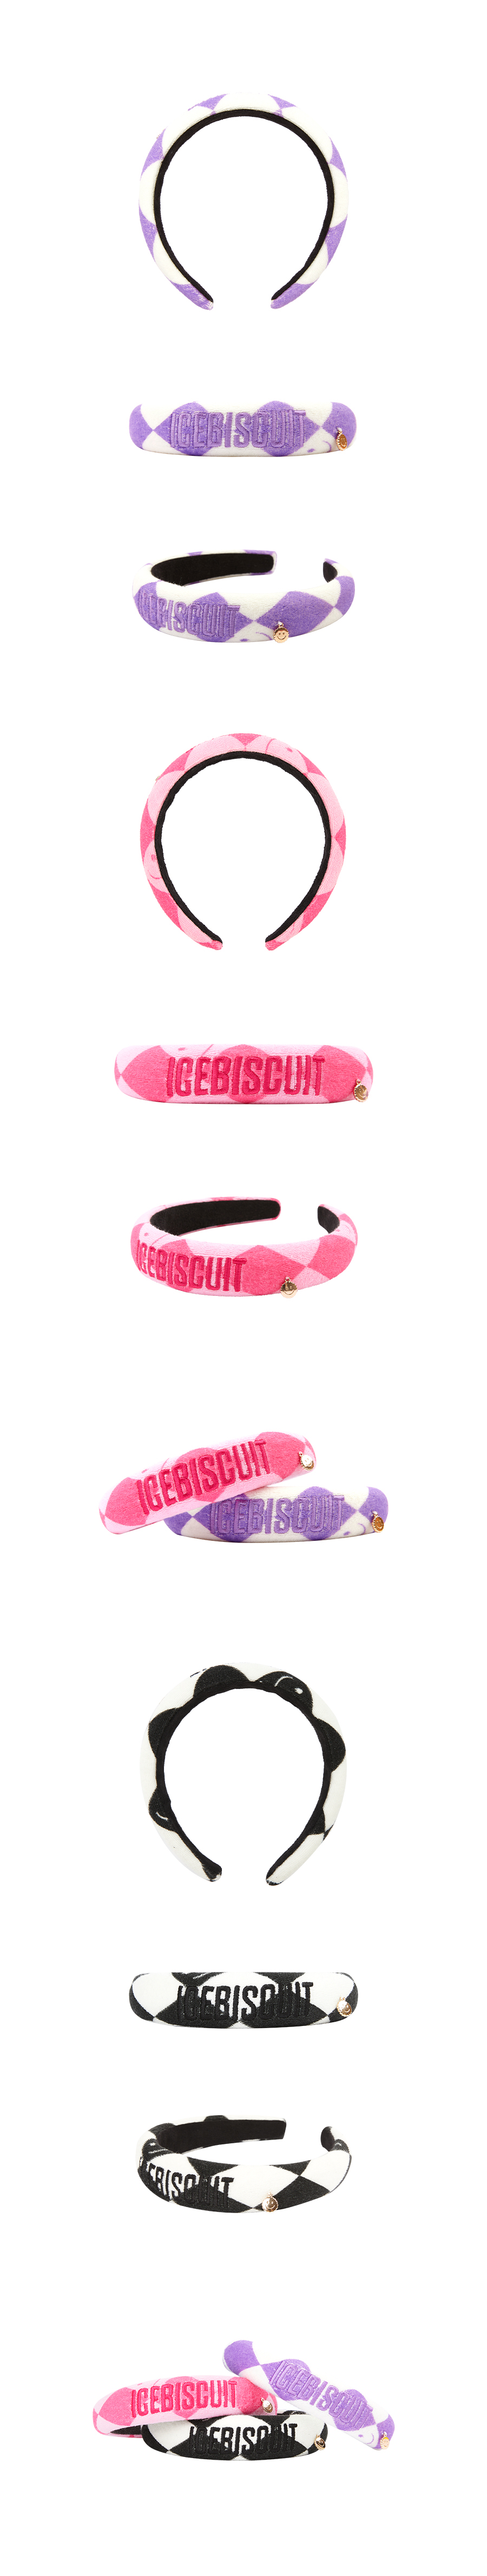 Icebiscuit smile terry hairband 상세 이미지